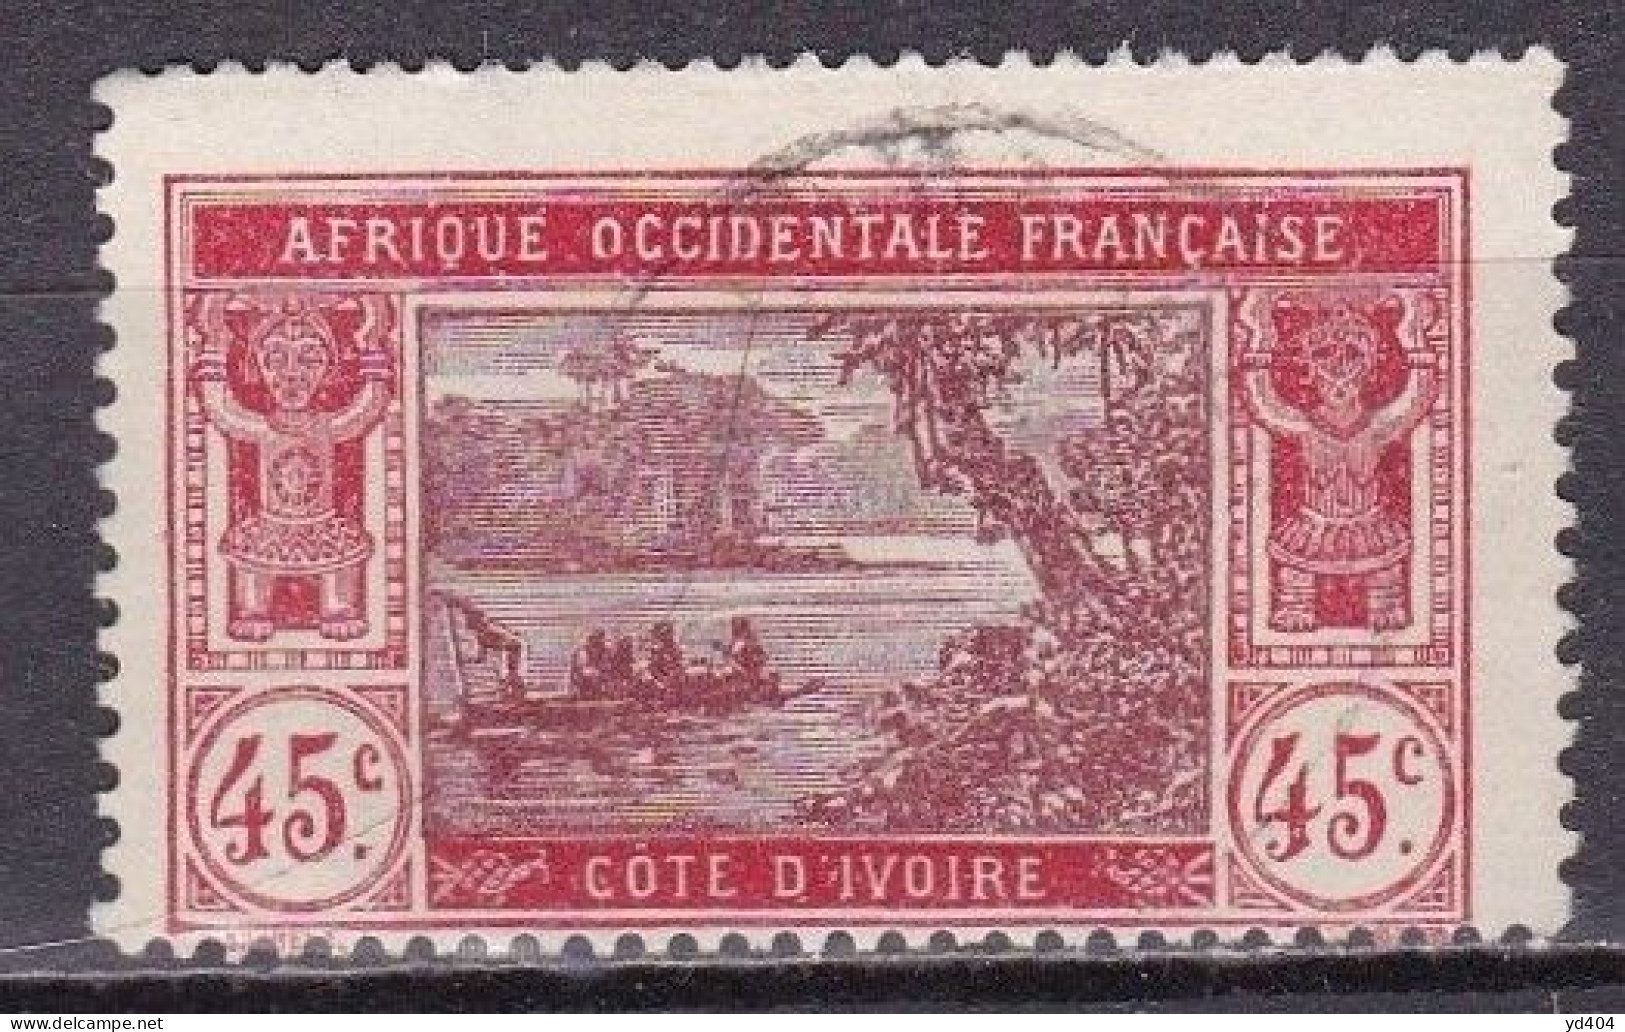 CF-CI-06C – FRENCH COLONIES – IVORY COAST – 1934 – EBRIE LAGOON – SG # 68 USED 23 € - Used Stamps